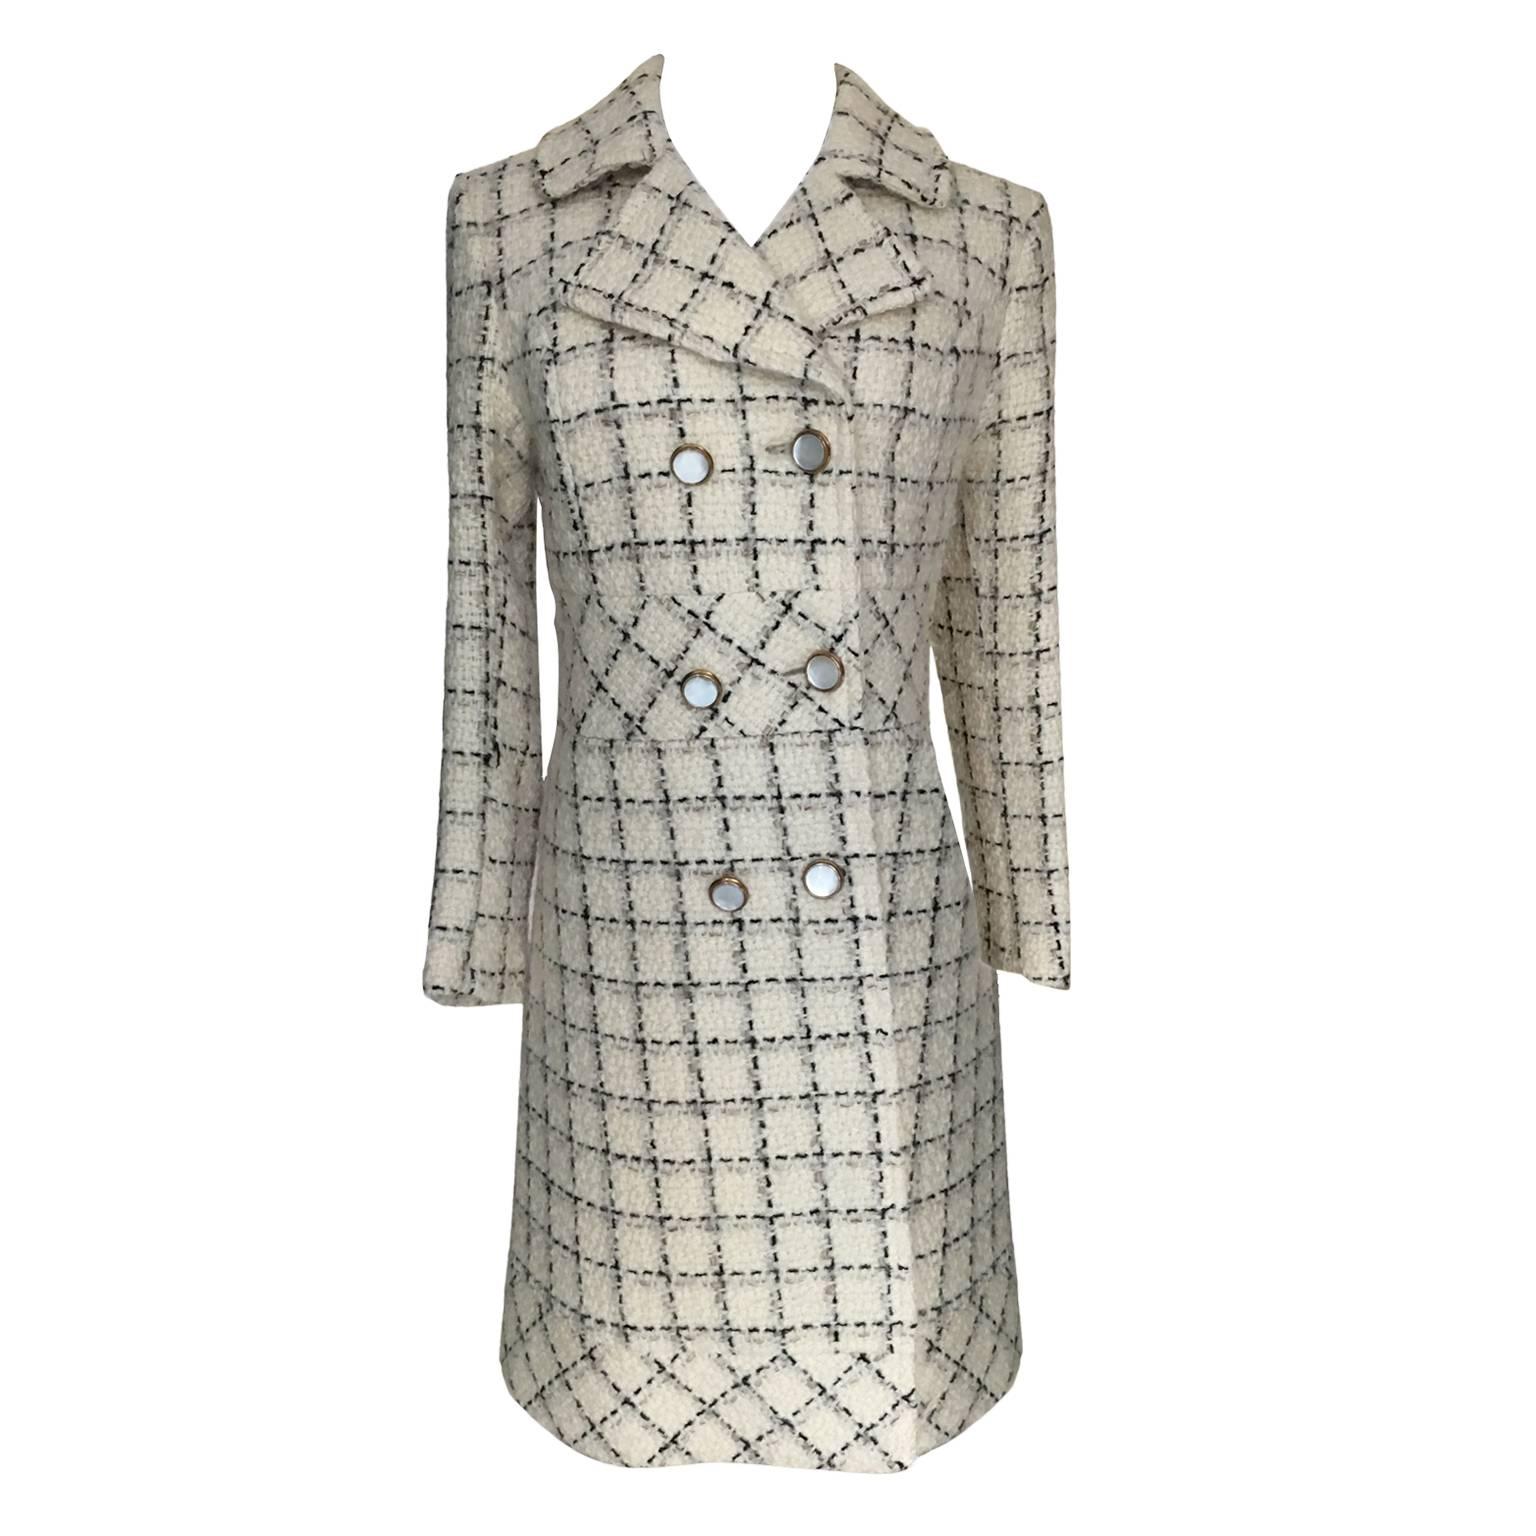 Elsa Schiaparelli beautifully textured tweed coat with button front closure.
Diagonally patch detailed waist and hem. Iconic contrast colours and patterns with ivory lining - Amazing fit. A classic.
Size : It fits like US 4-6, EU 36
Measurements